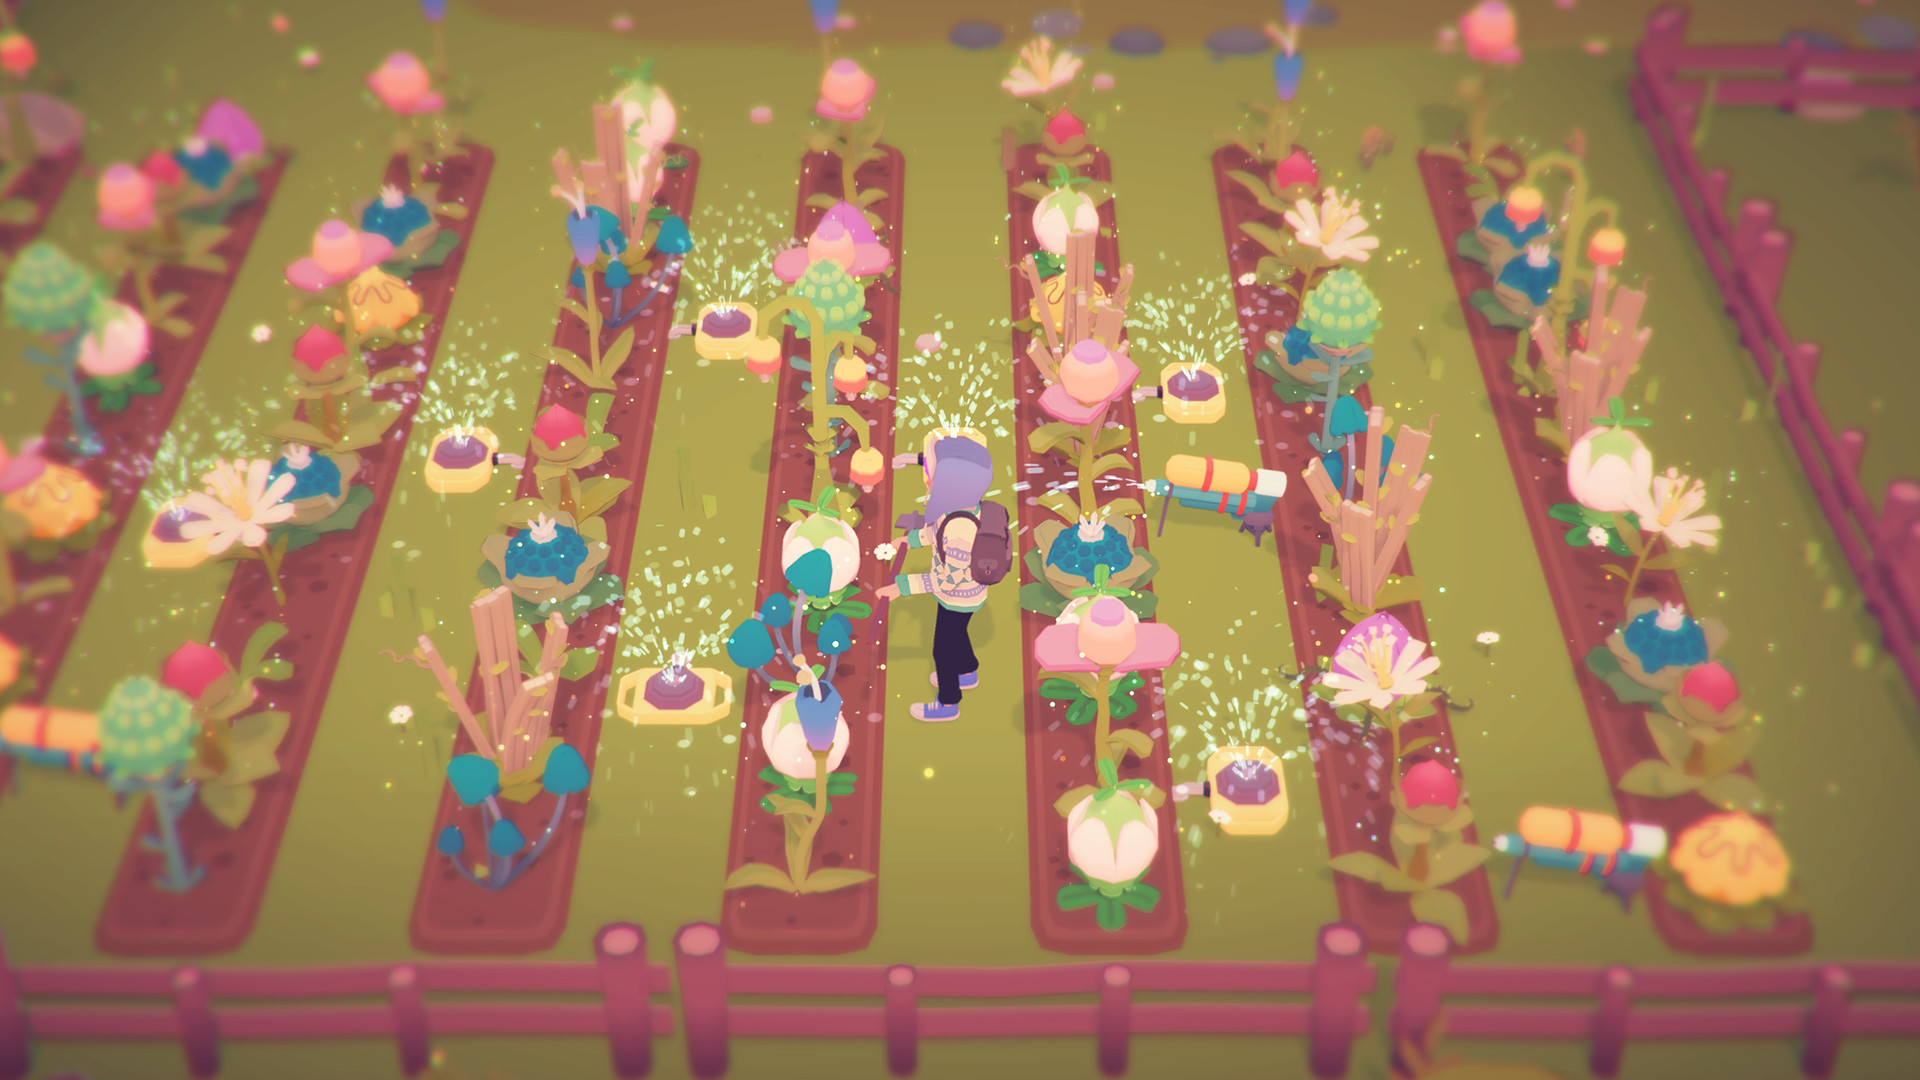 Farming rows and rows of Ooblets sprouts